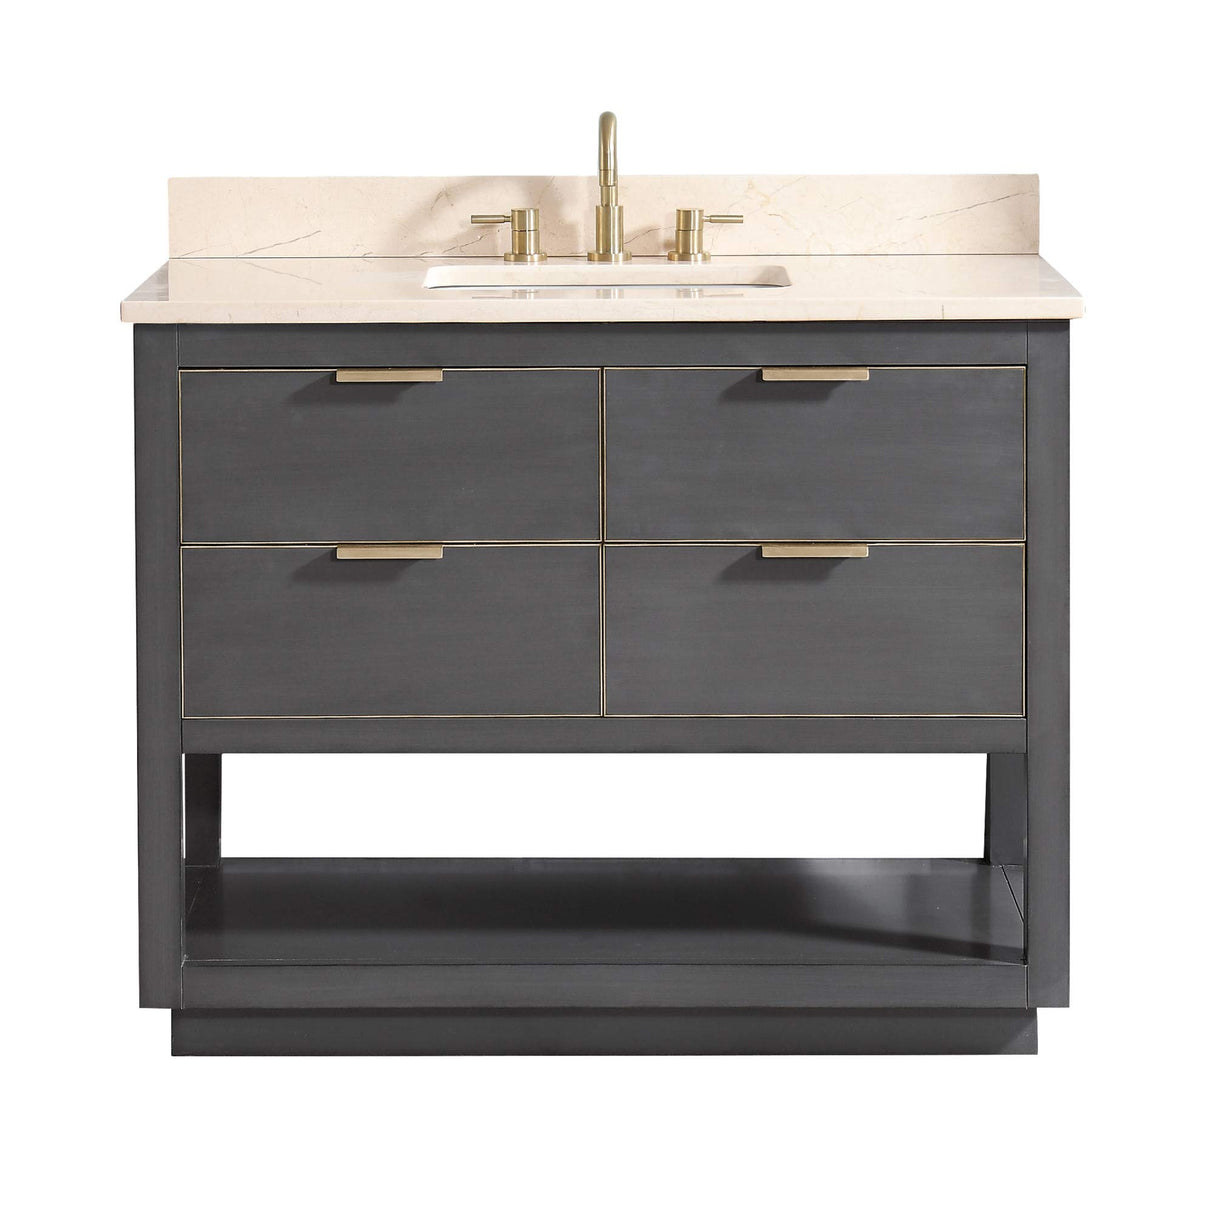 Avanity Allie 43 in. Vanity Combo in Twilight Gray with Gold Trim and Crema Marfil Marble Top